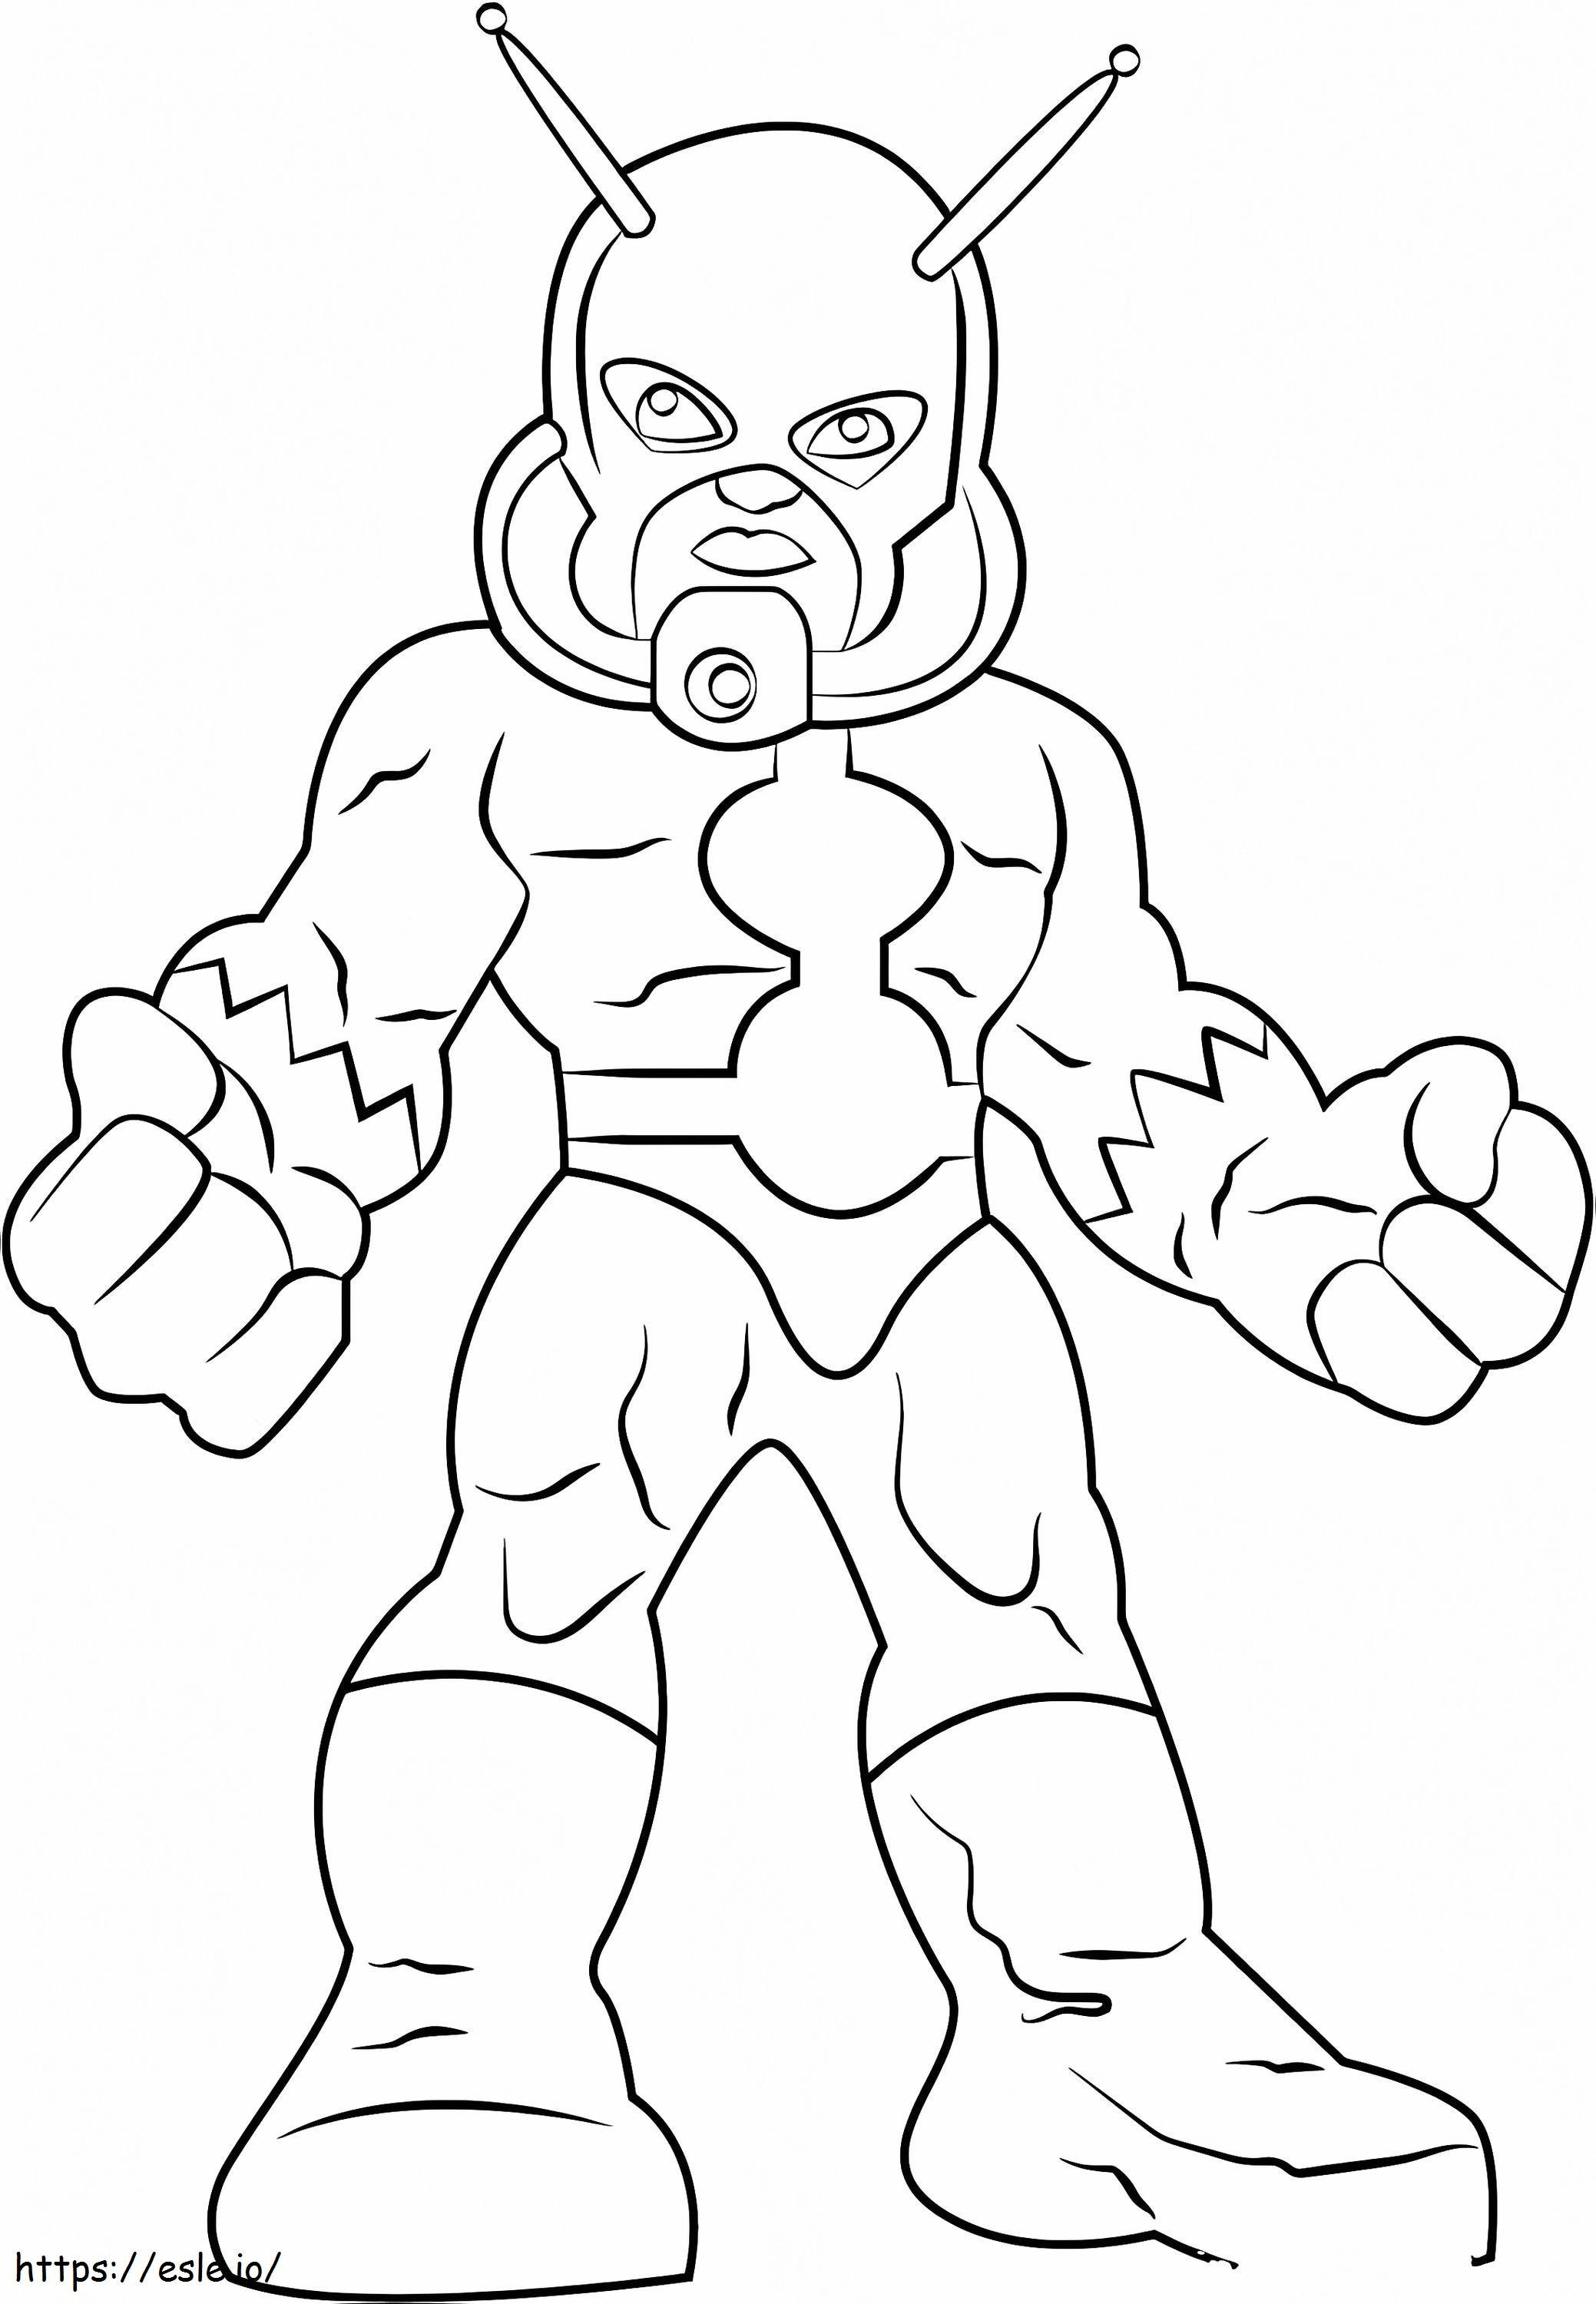 Ant Man coloring page